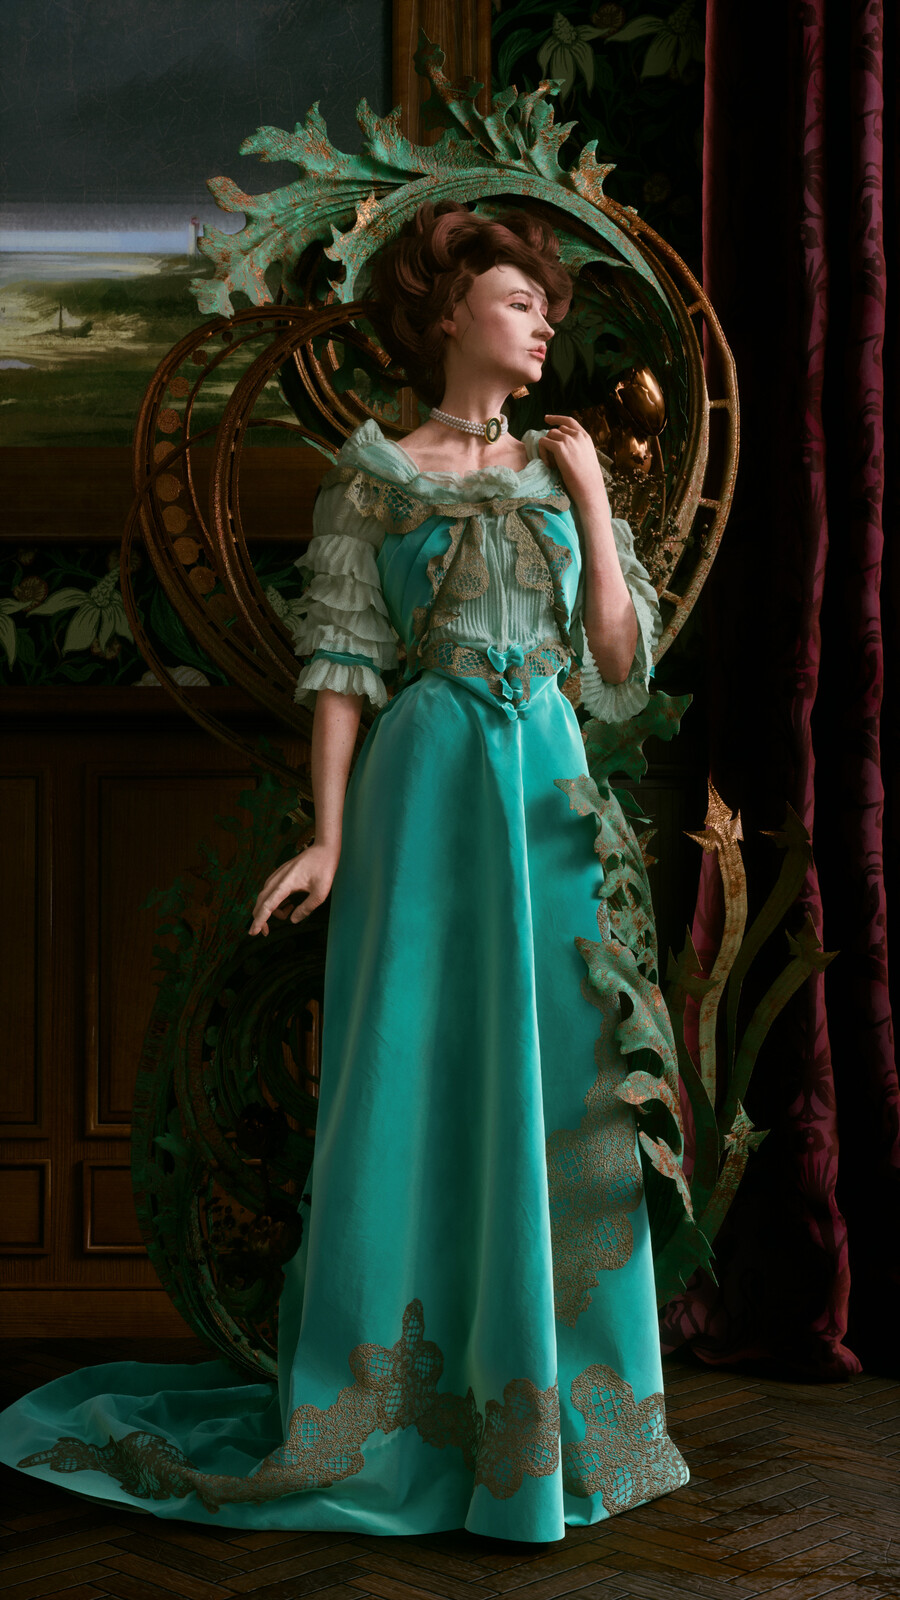 Two-piece evening gown consisting of gown and train